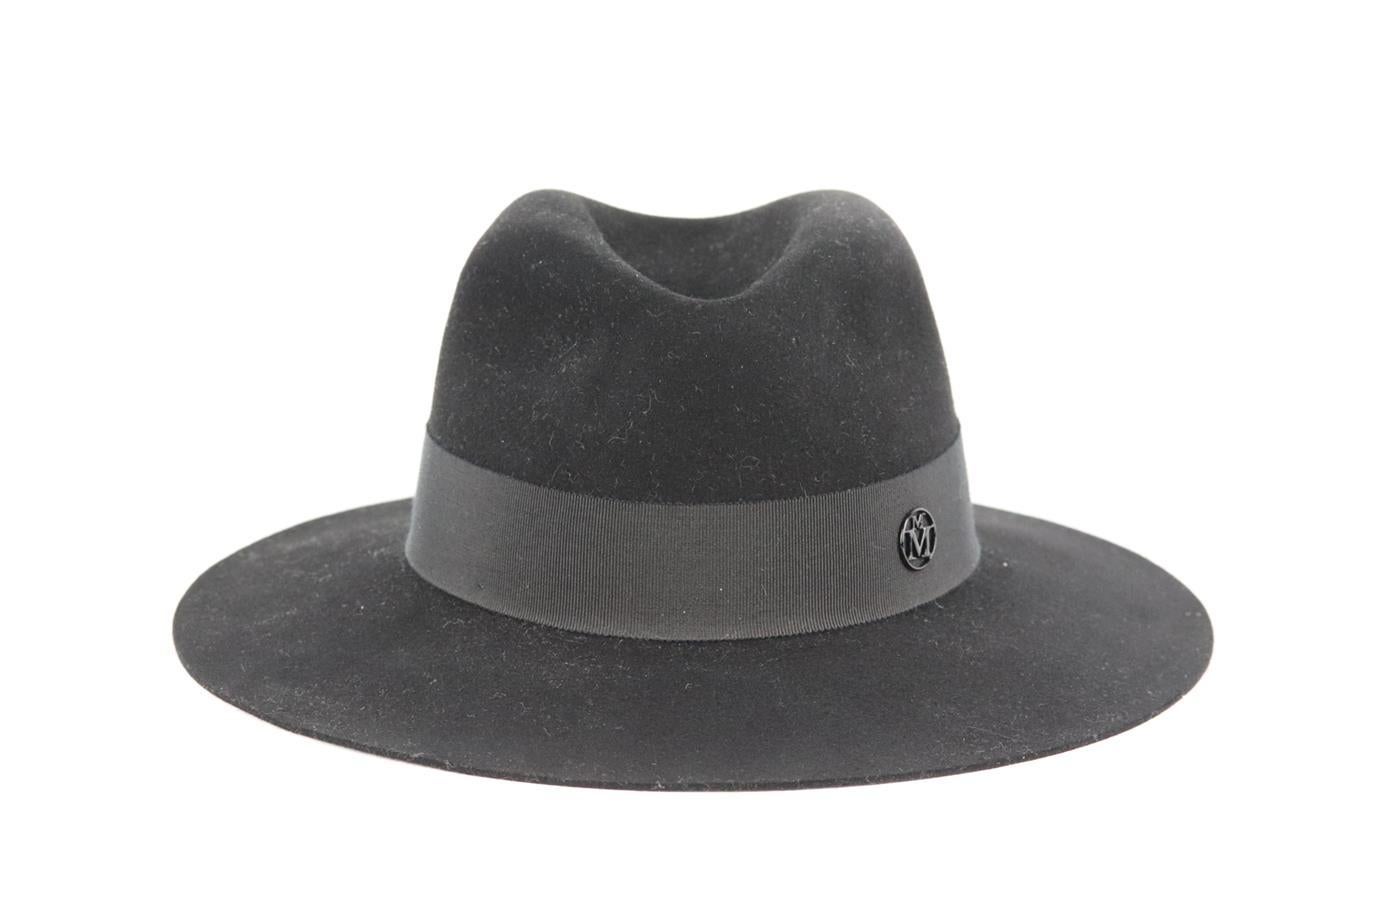 Maison Michel grosgrain trimmed wool felt fedora. Black. Pull on. 100% Wool; trim: 56% cotton, 44% viscose. Does not come with dustbag or box. Size: Small. Circumference: 22.6 in. Brim Width: 3 in. Very good condition - No sign of wear; see pictures.